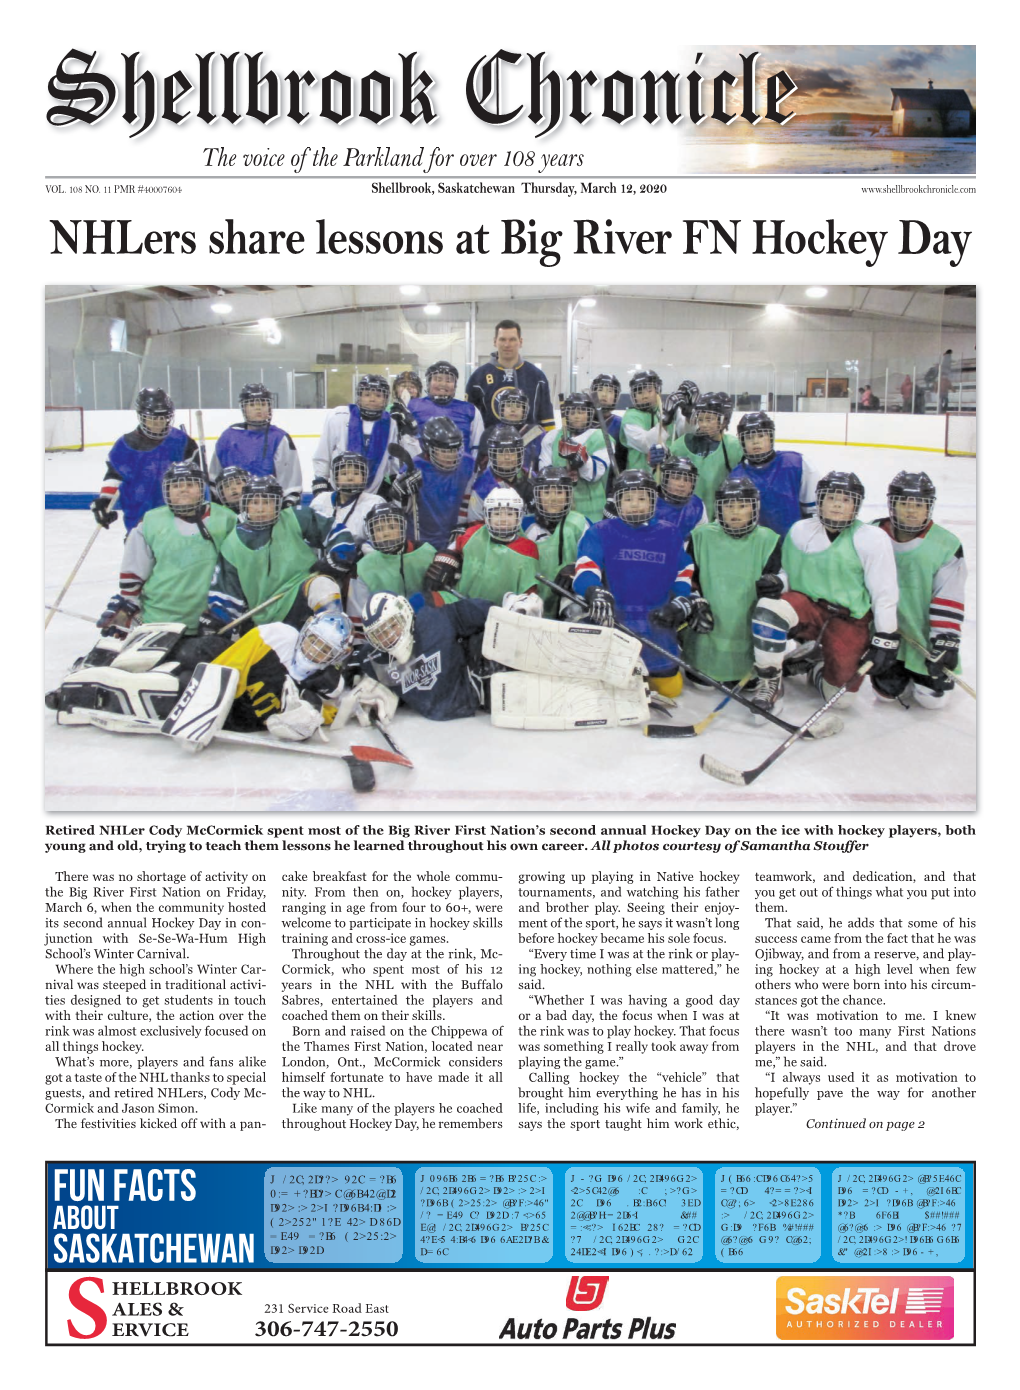 Nhlers Share Lessons at Big River FN Hockey Day